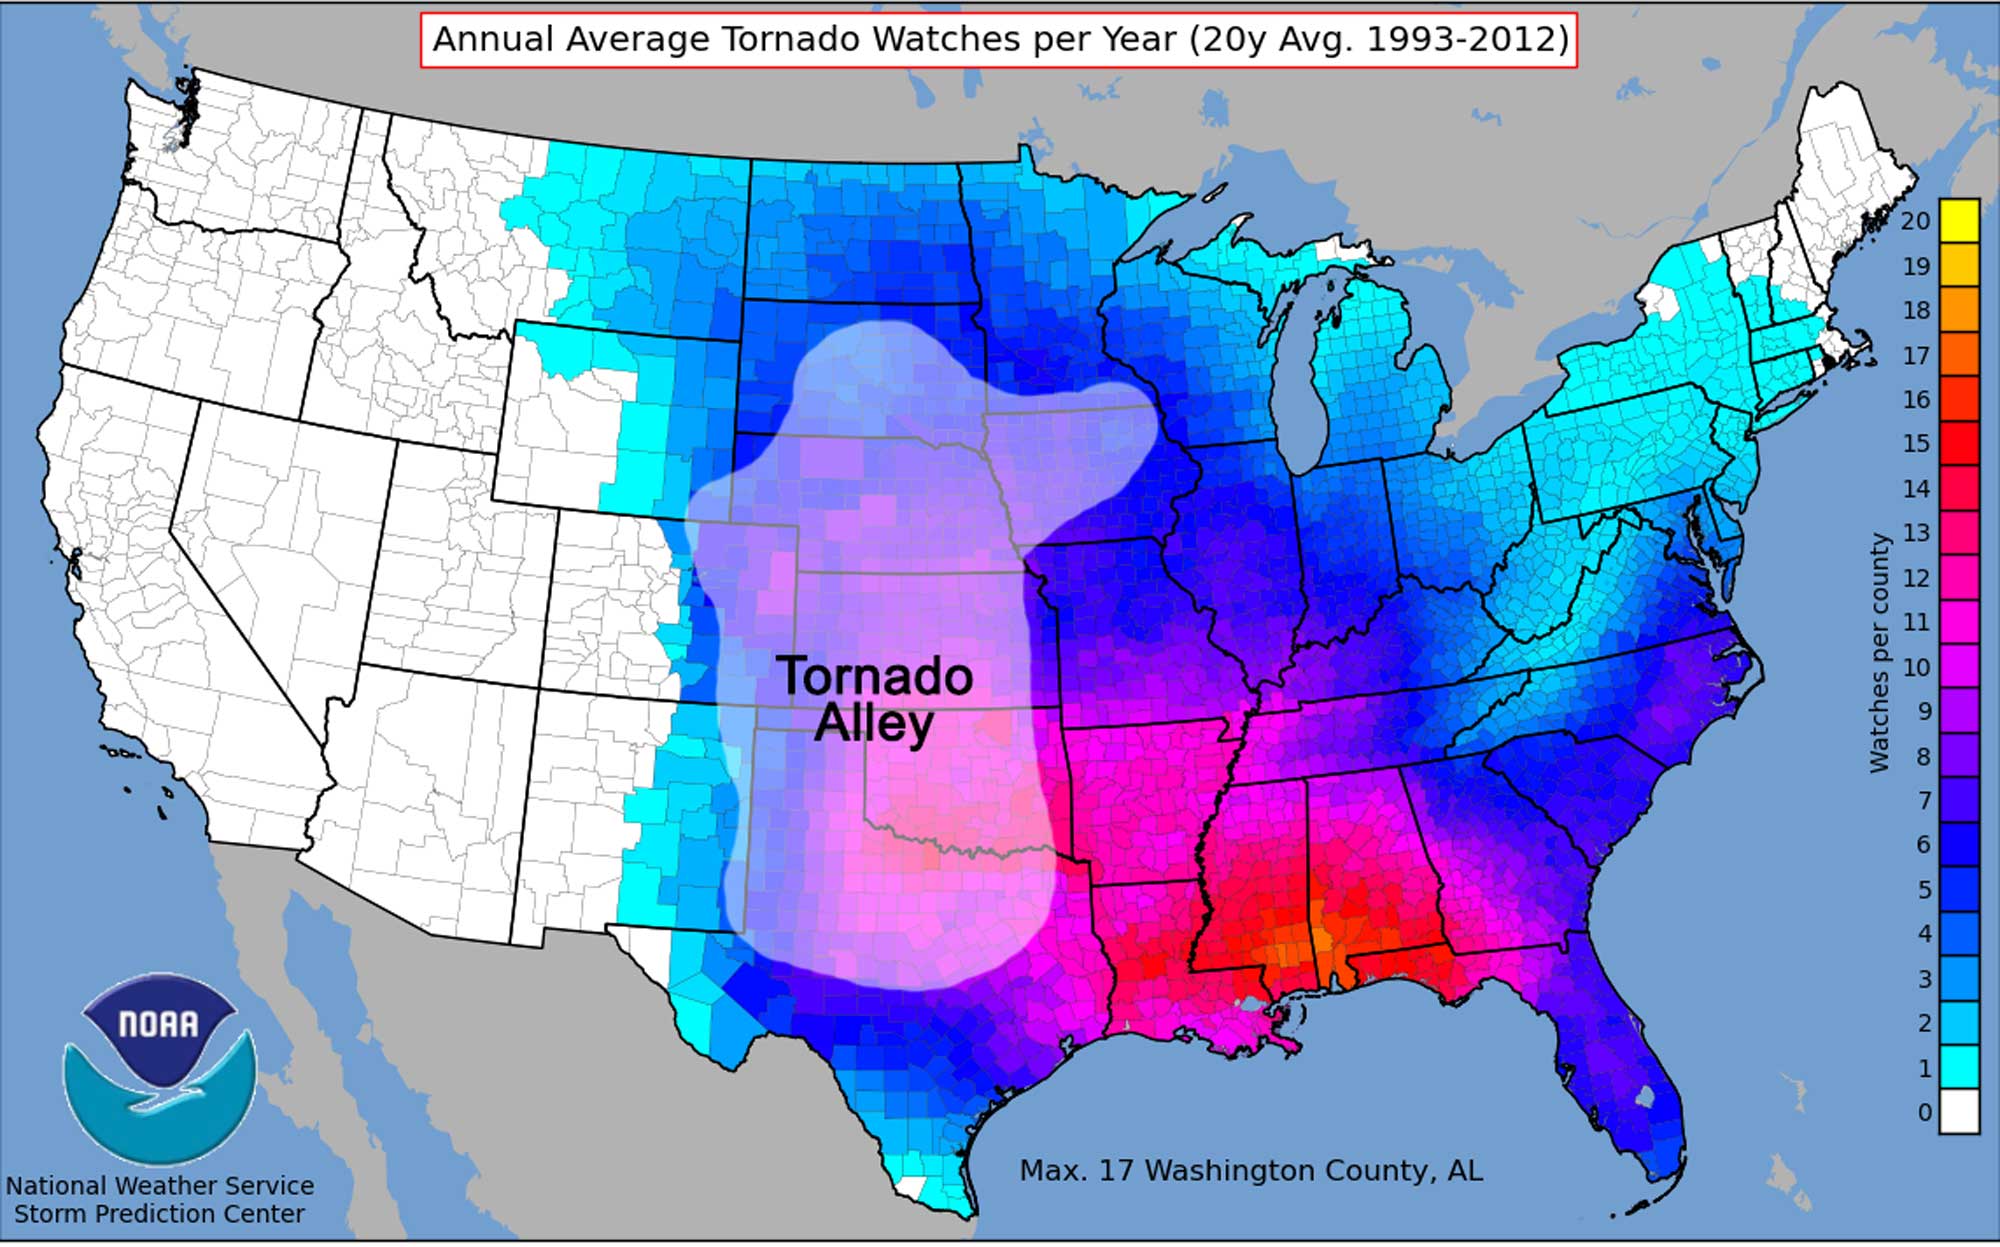 Map of the United States showing the frequency of tornado watches in individual counties, with a region in the central U.S. known as "Tornado Alley" identified.